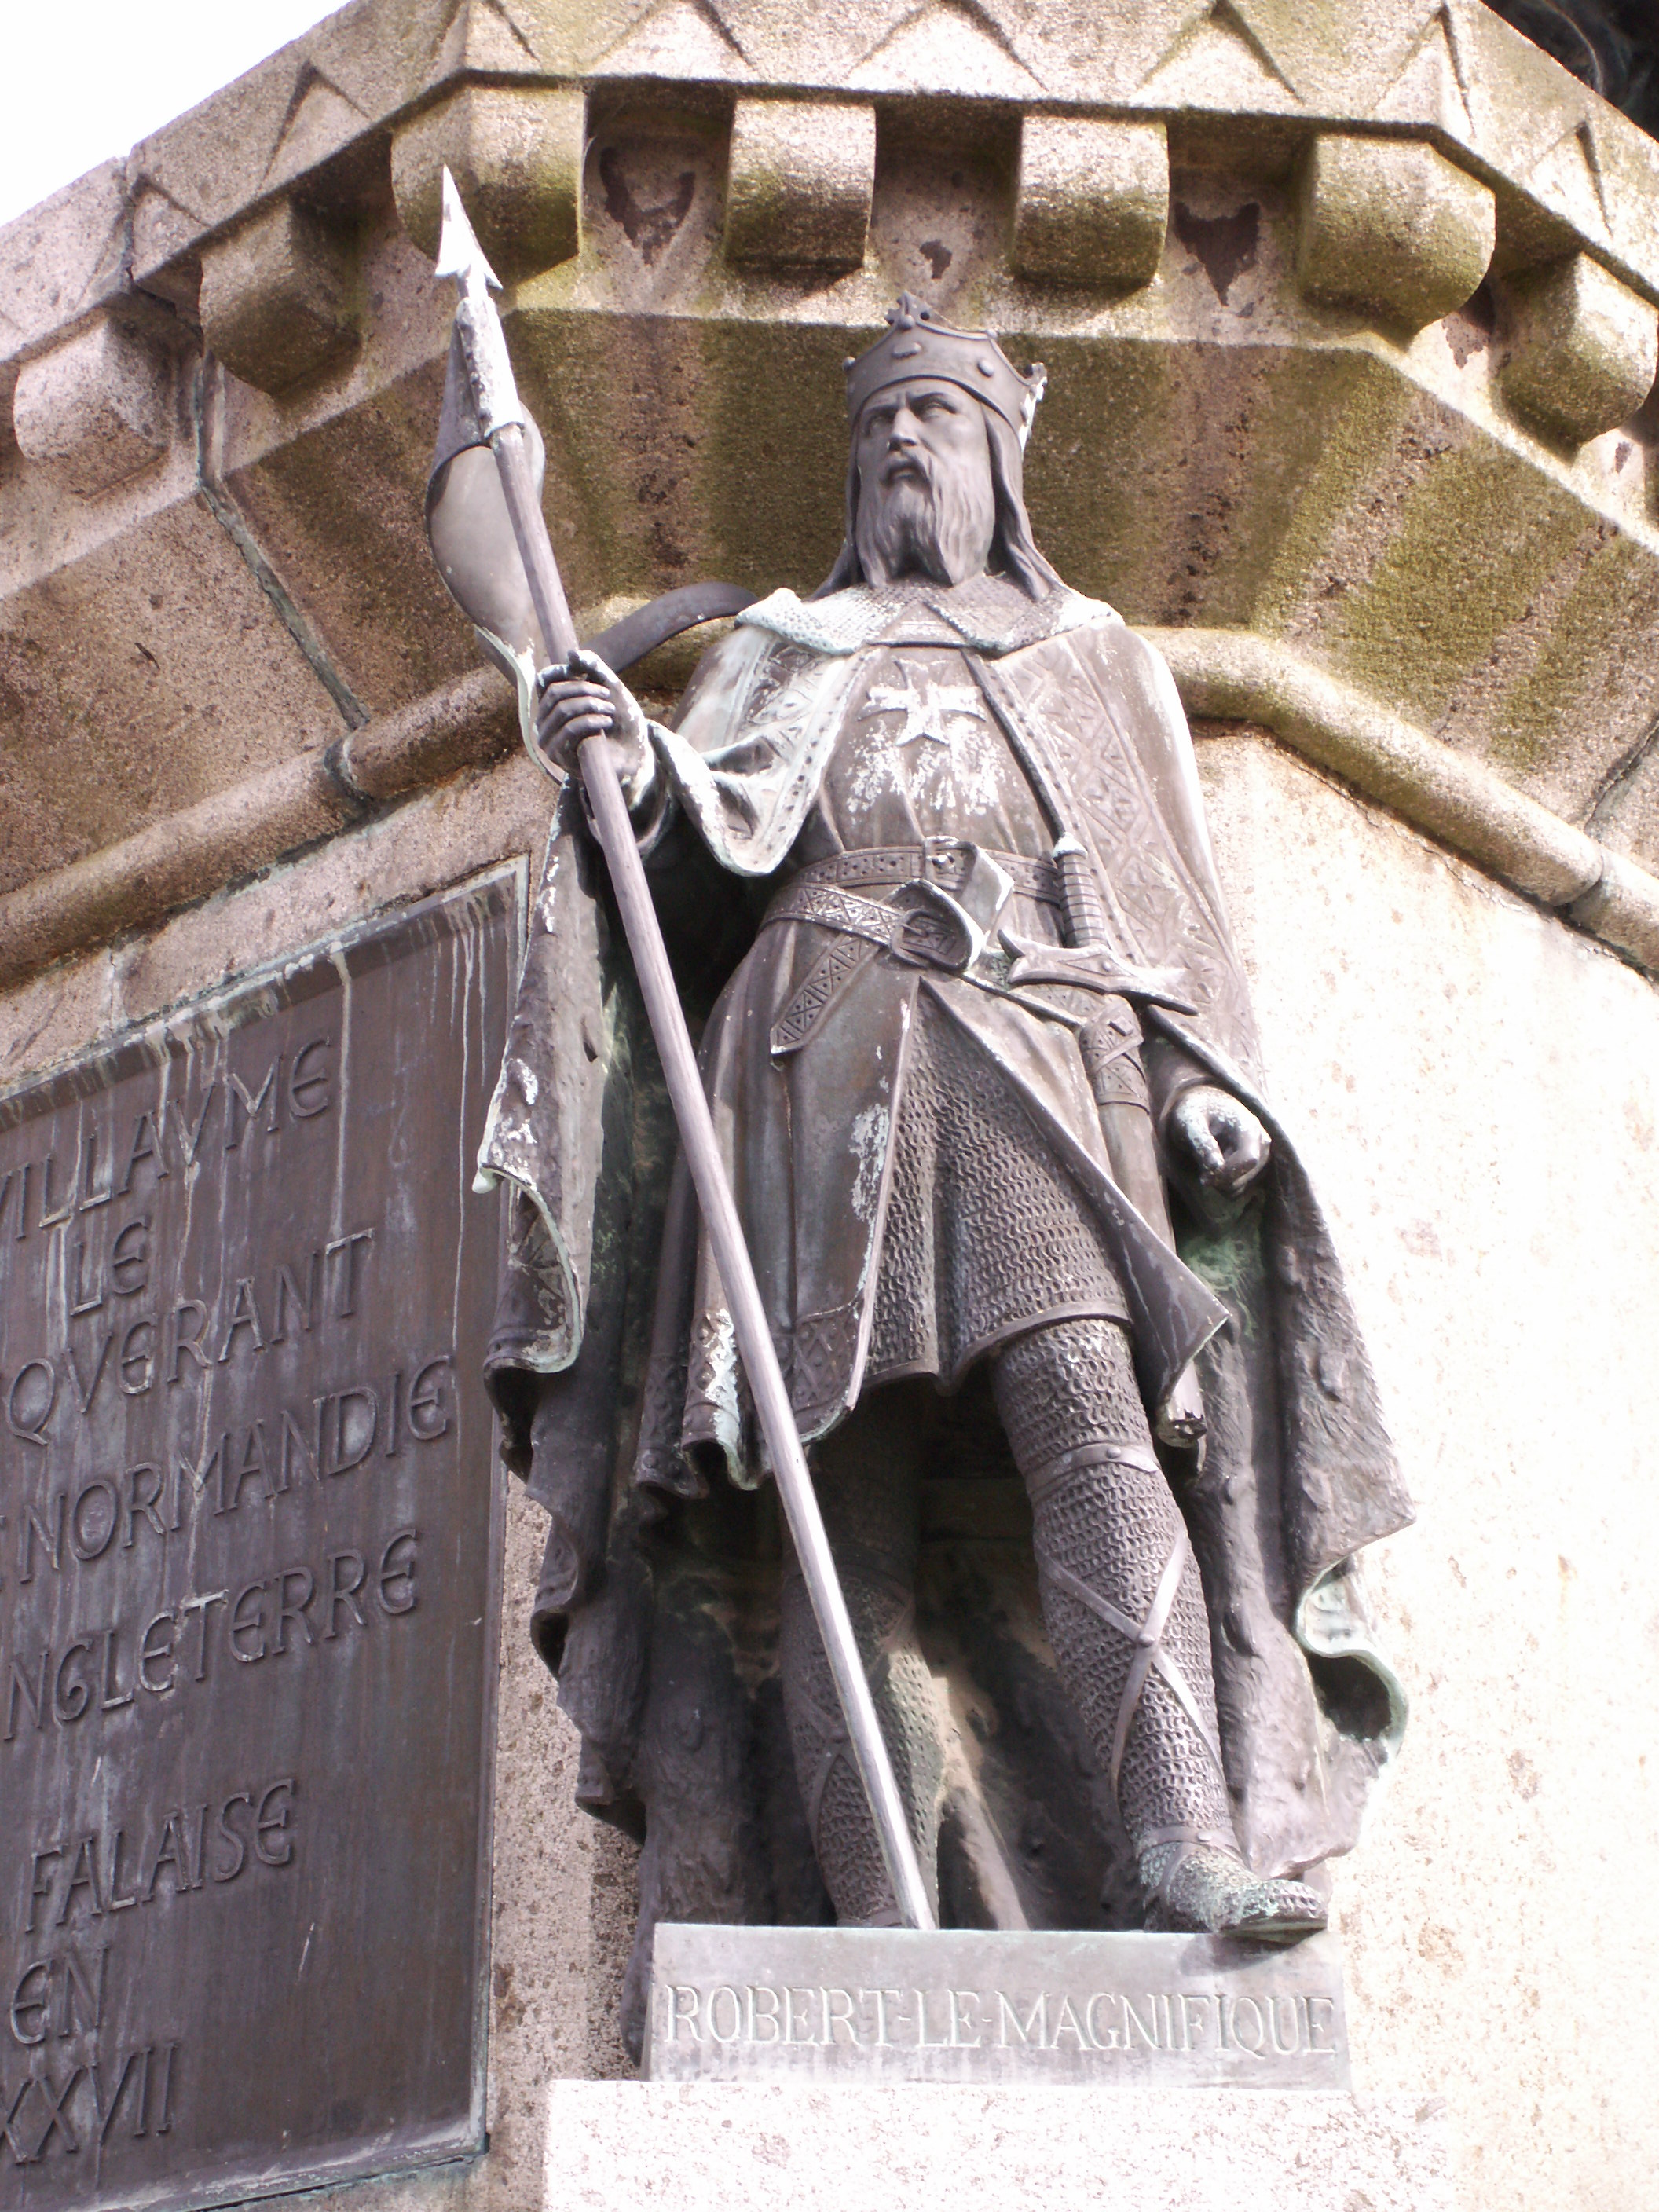 https://voyages.ideoz.fr/wp-content/plugins/wp-o-matic/cache/3143e_Robert_magnificent_statue_in_falaise.JPG